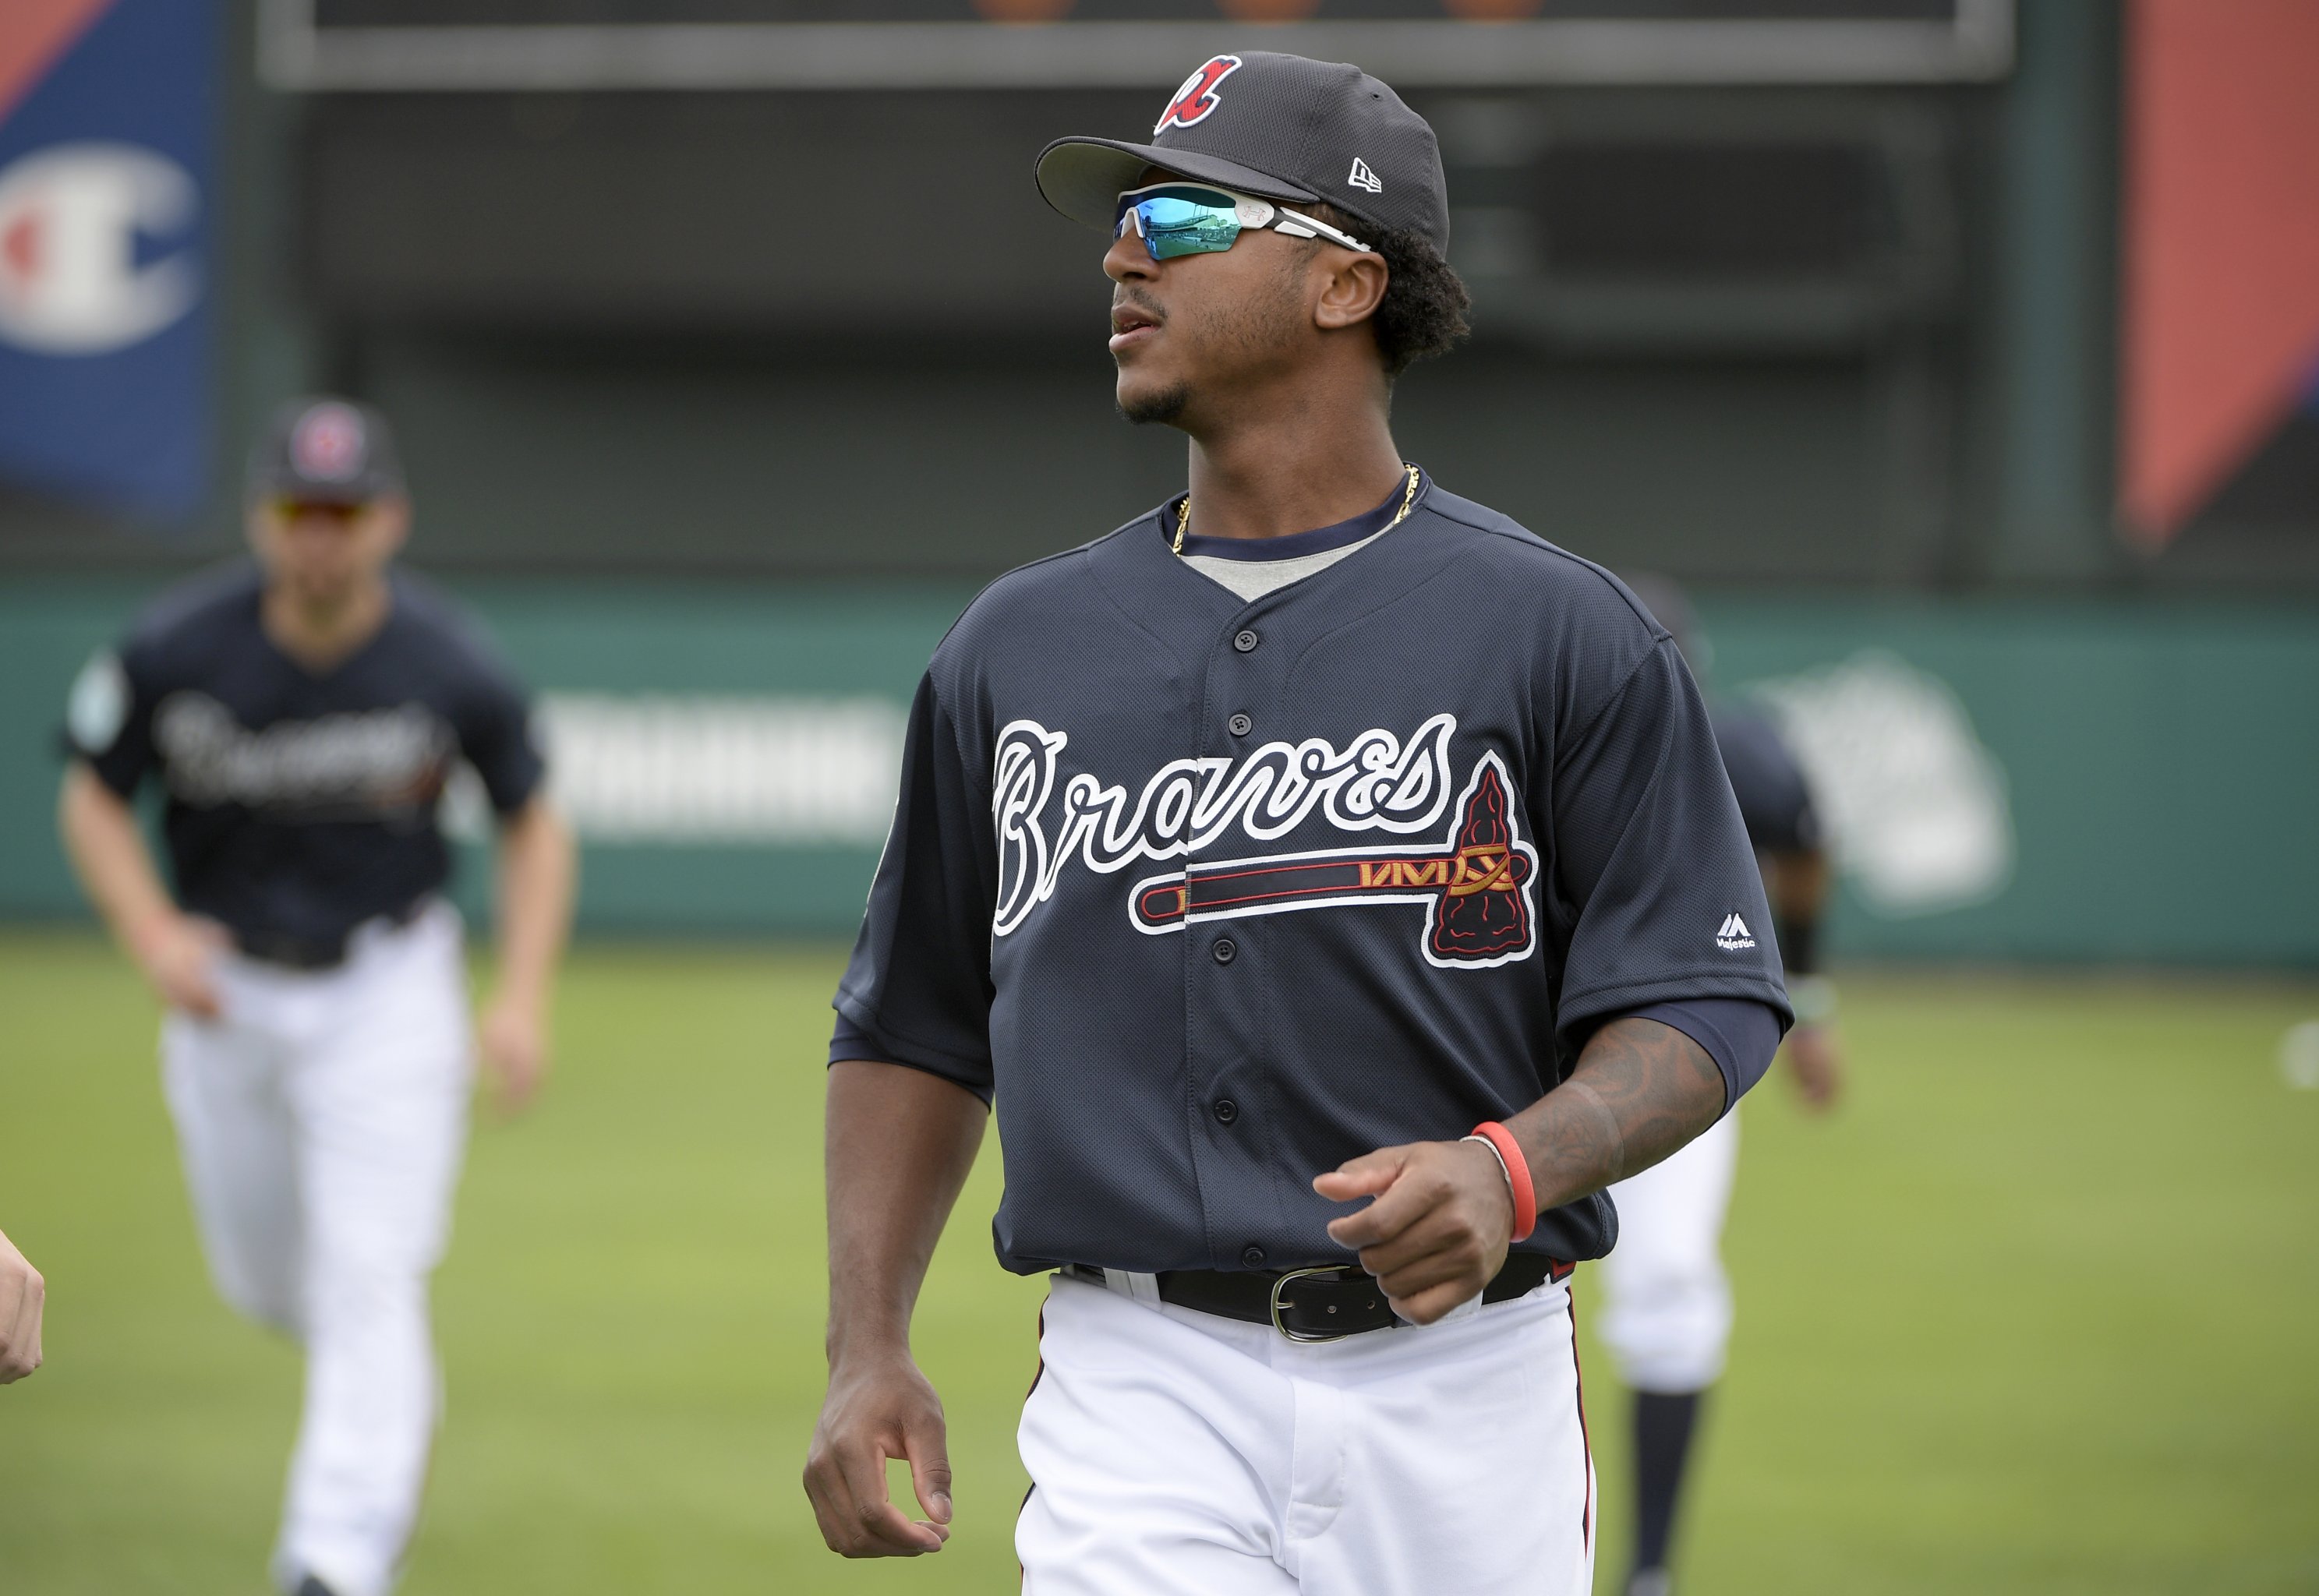 Demeritte and Toussaint named M-Braves Players of the Year